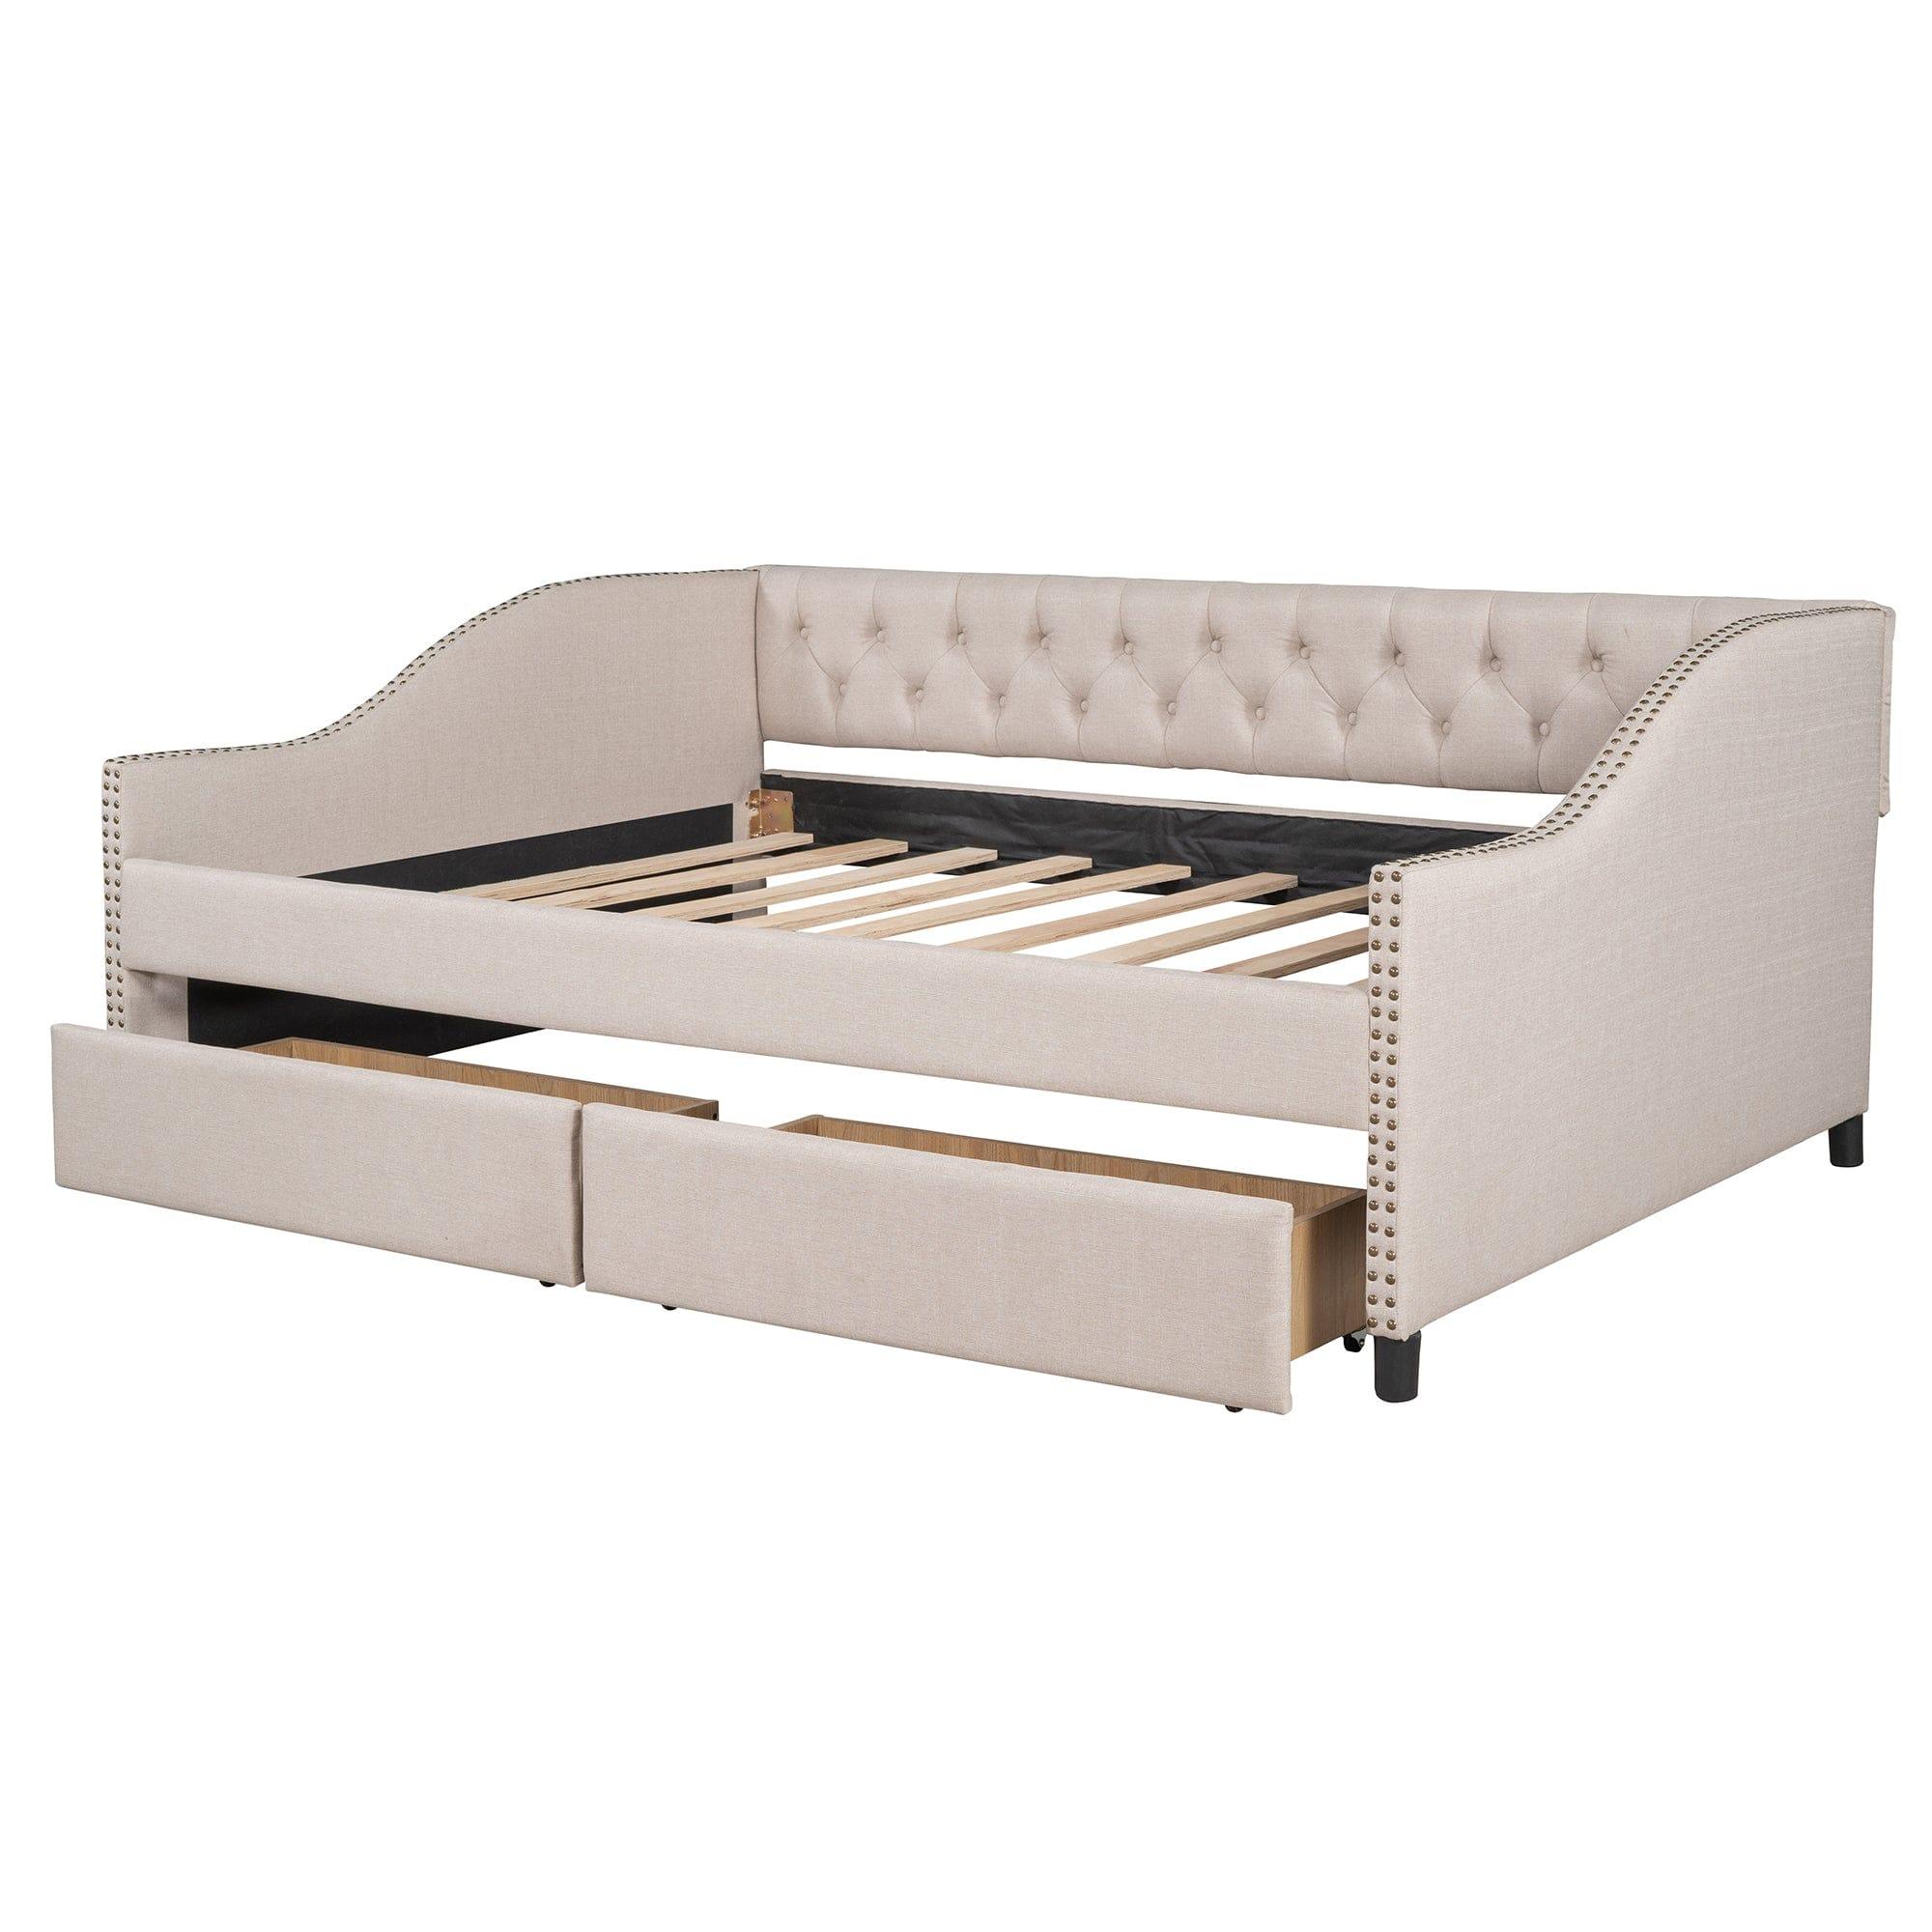 Shop Upholstered daybed with Two Drawers, Wood Slat Support, Beige, Full Size(OLD SKU :LP001111AAA) Mademoiselle Home Decor